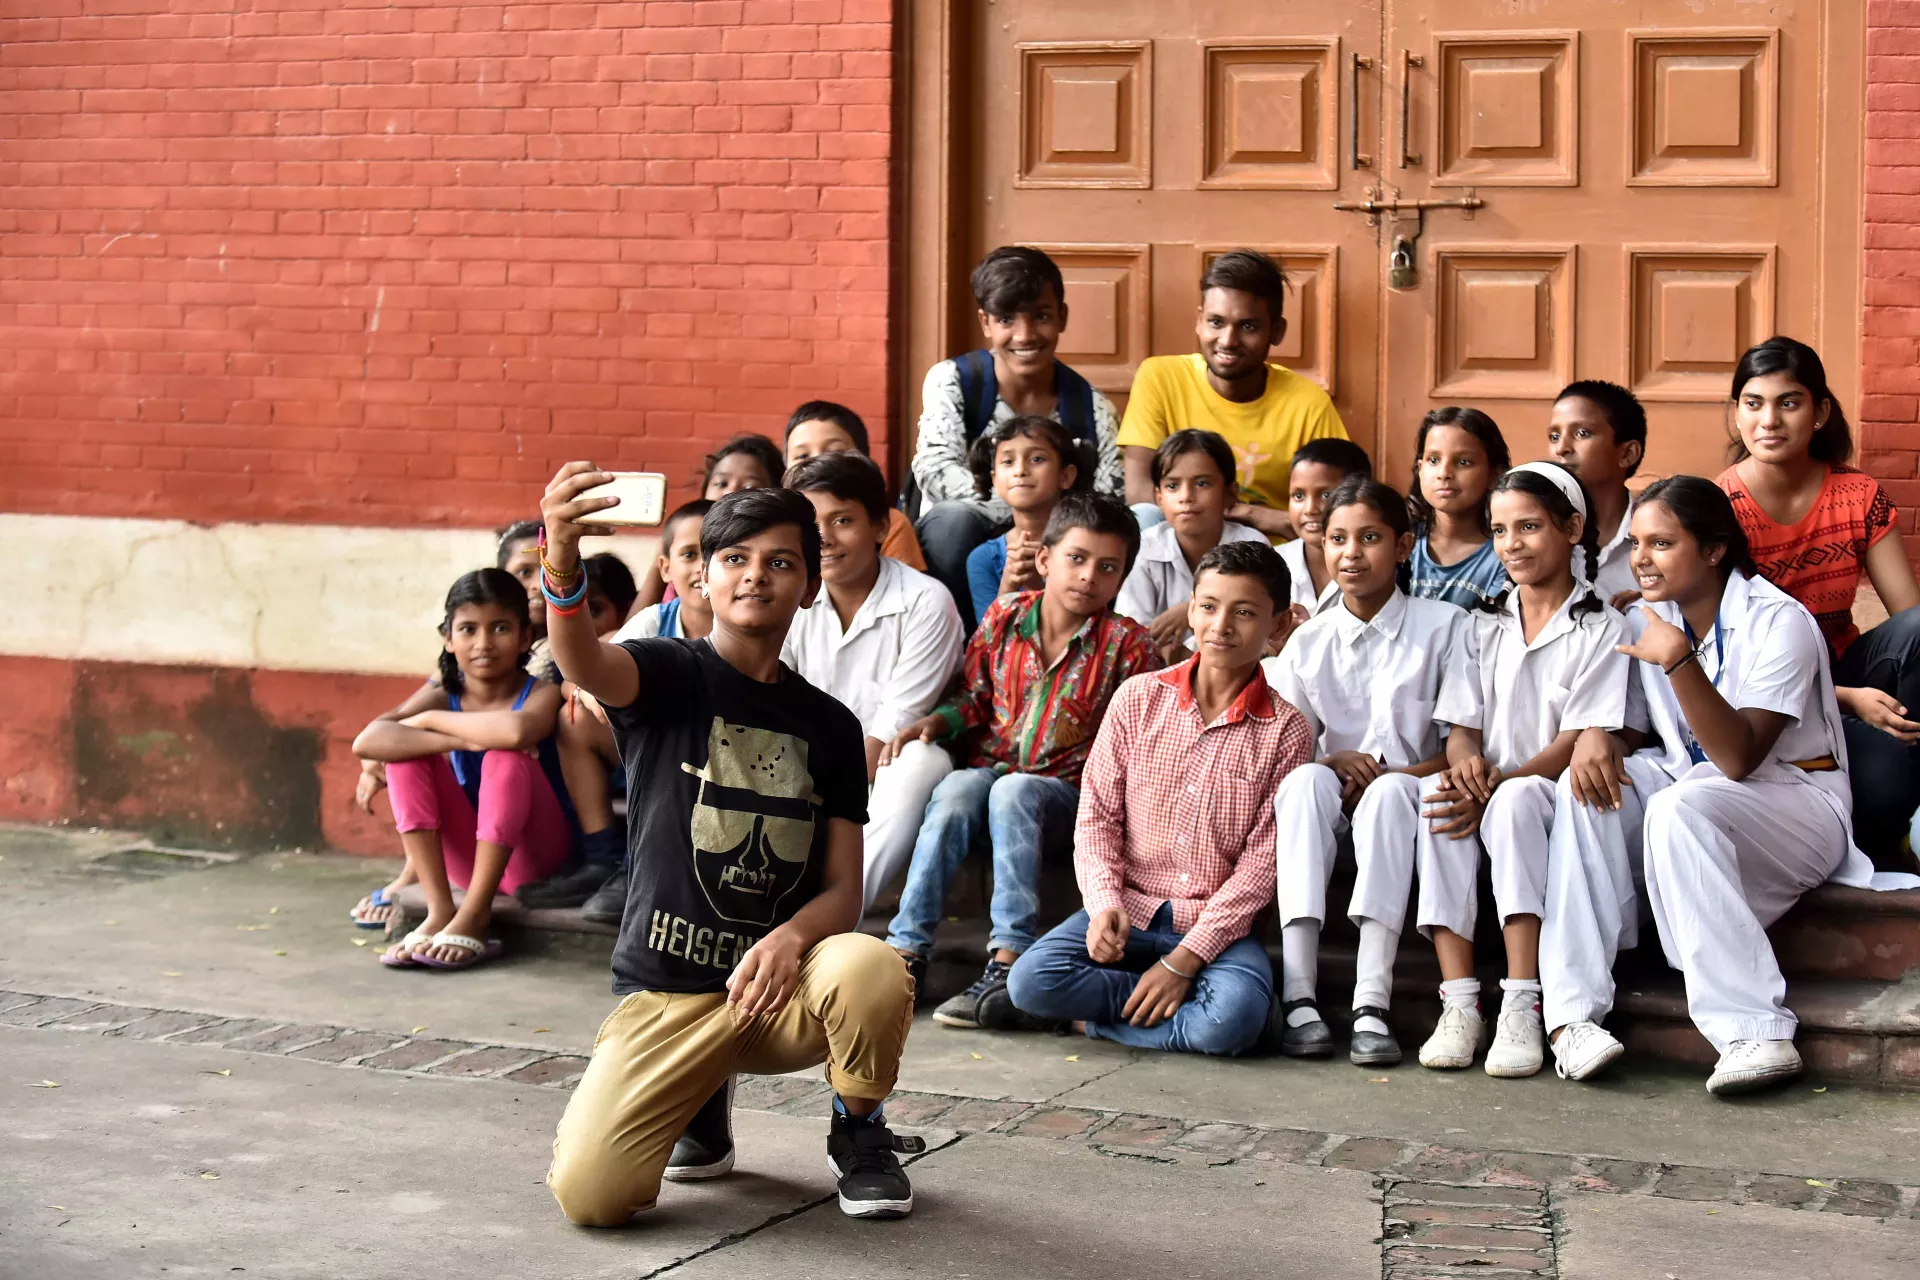 A group of children taking selfie.